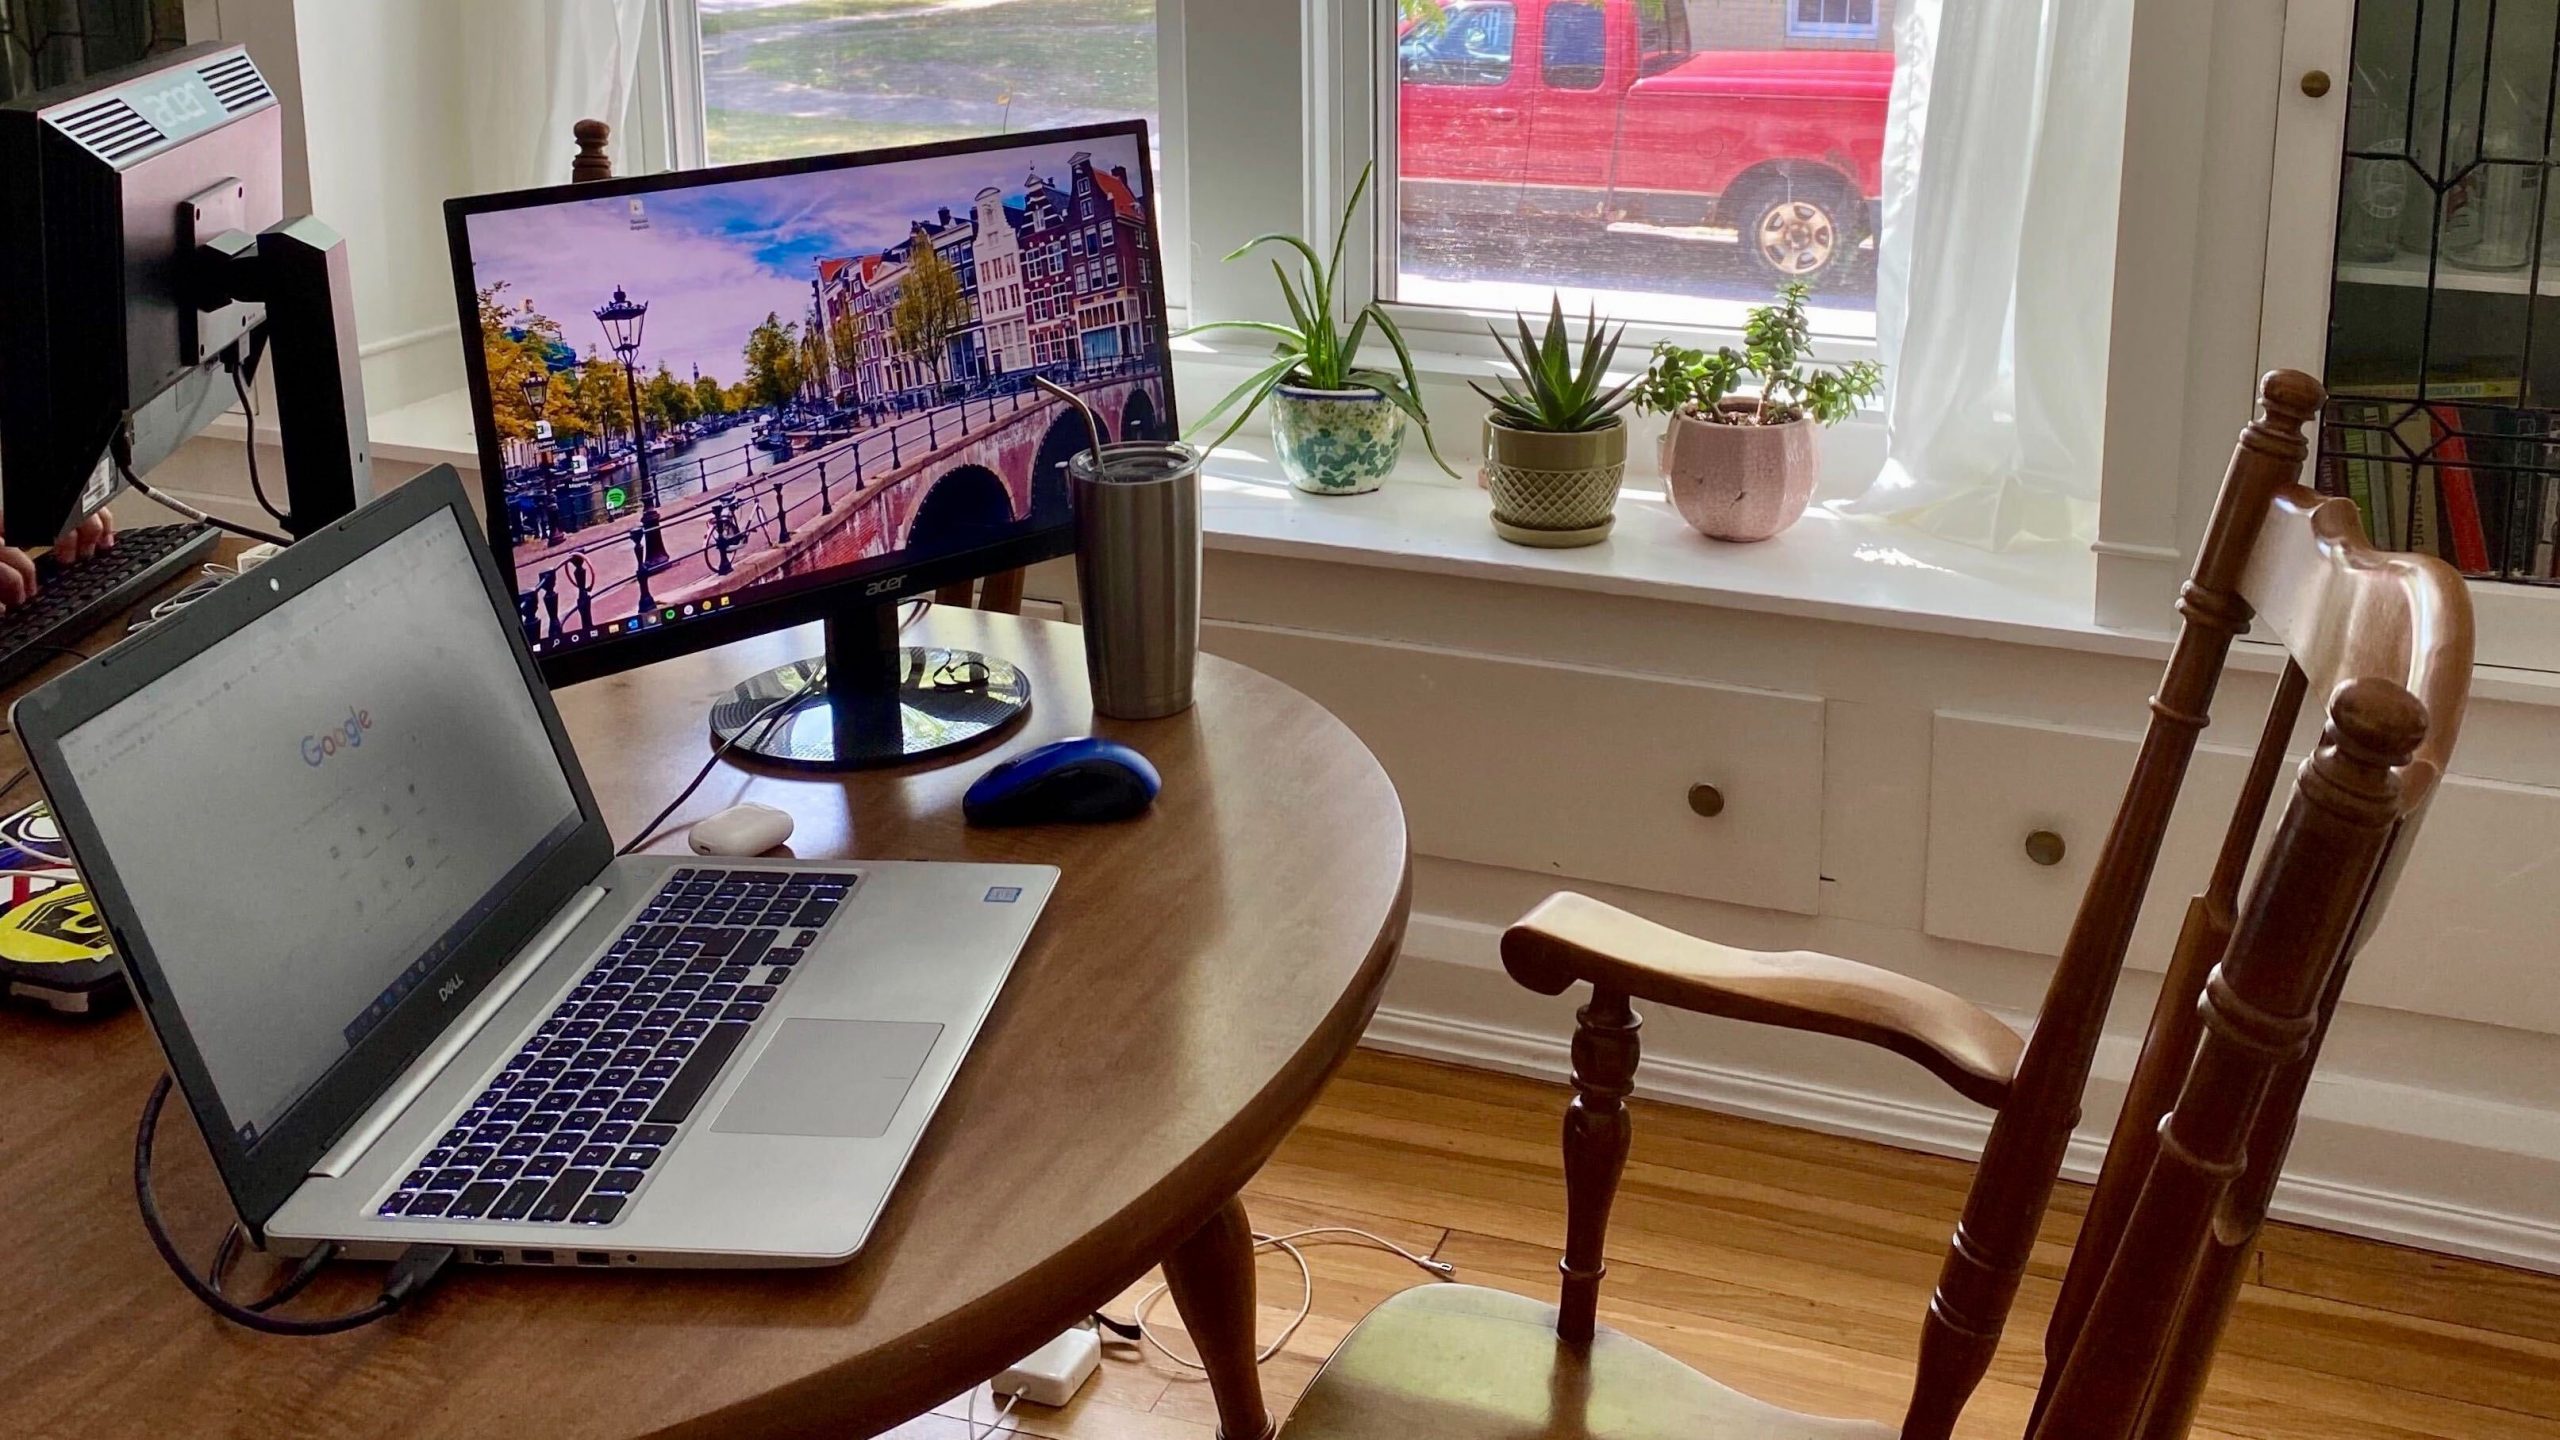 Image of a laptop and second monitor in front of a chair in a home setting.